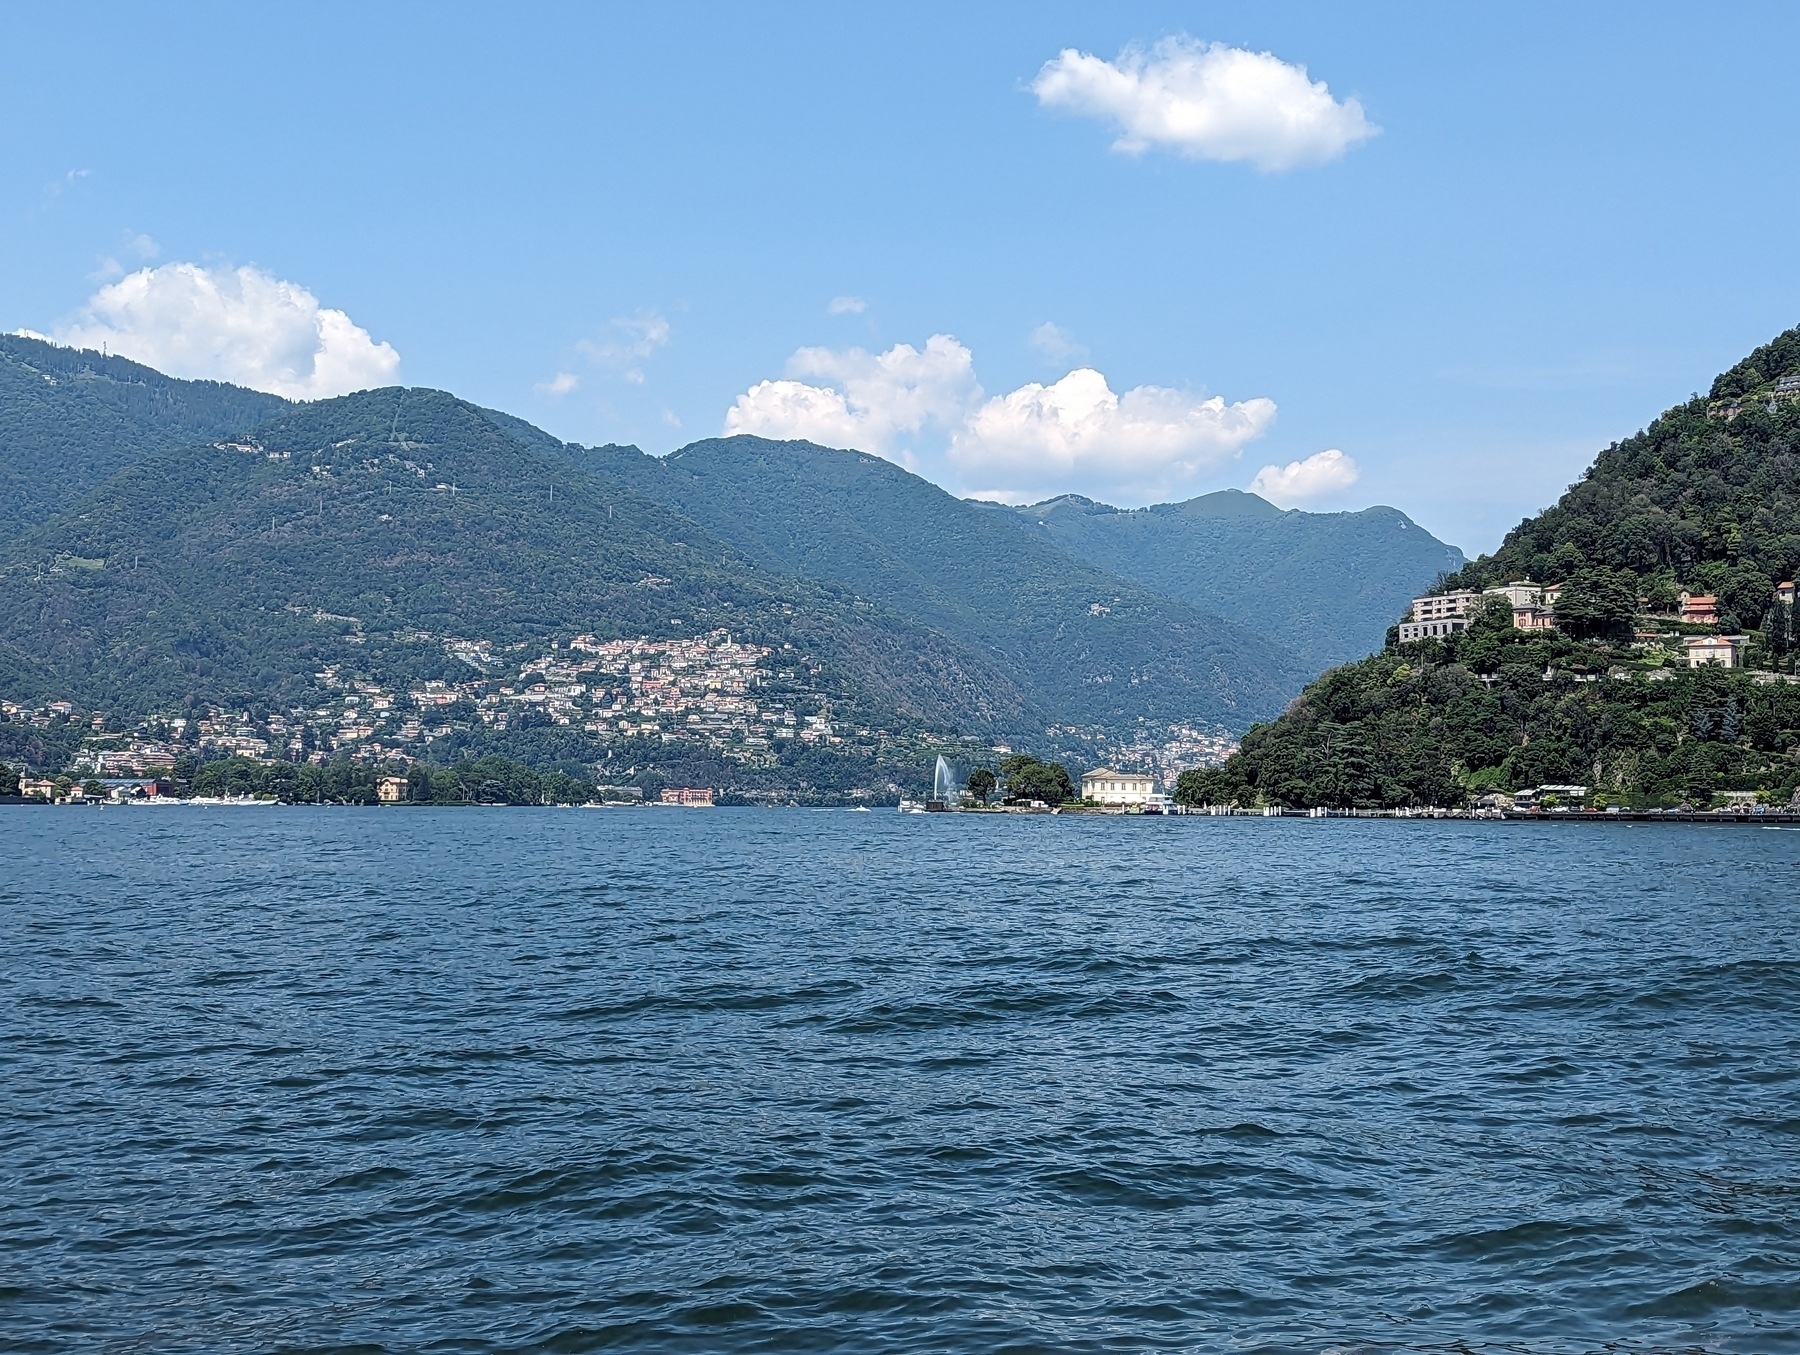 Lake Como, a large body of water with some small waves, with a fountain in the middle distance, with green mountains in the background, with a slightly cloudy sky